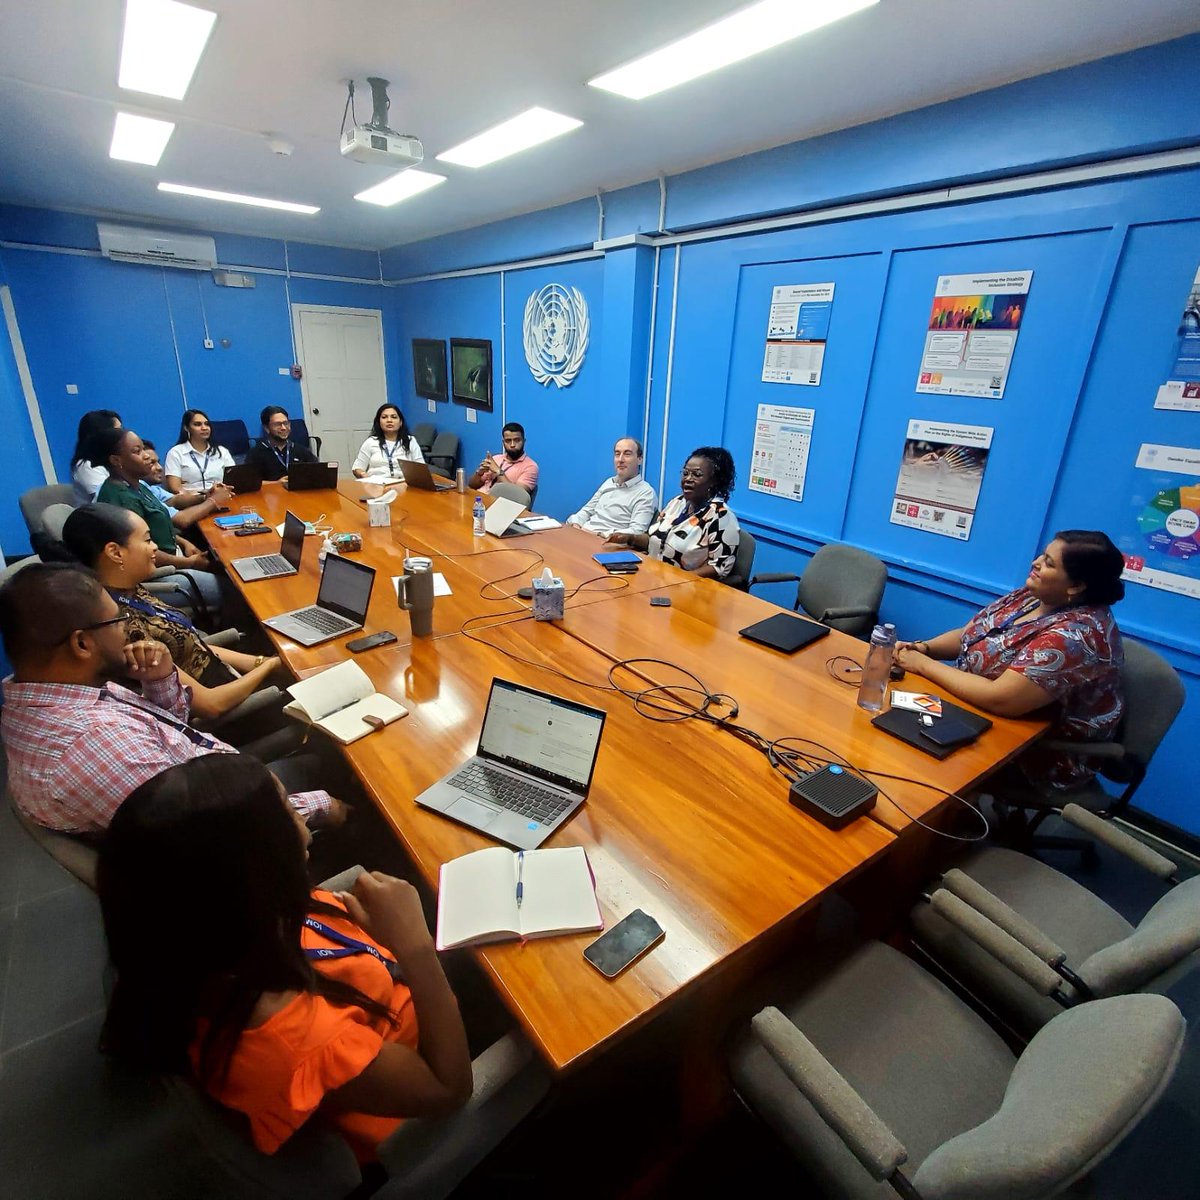 #GUYANA 🤝🏽The official visit of IOM's Caribbean Coordinator @patricequesada could not be complete without meeting the amazing team on the ground in Guyana! 📷Here are some snapshots from the IOM Guyana staff meet. @iomguyana #Teamwork